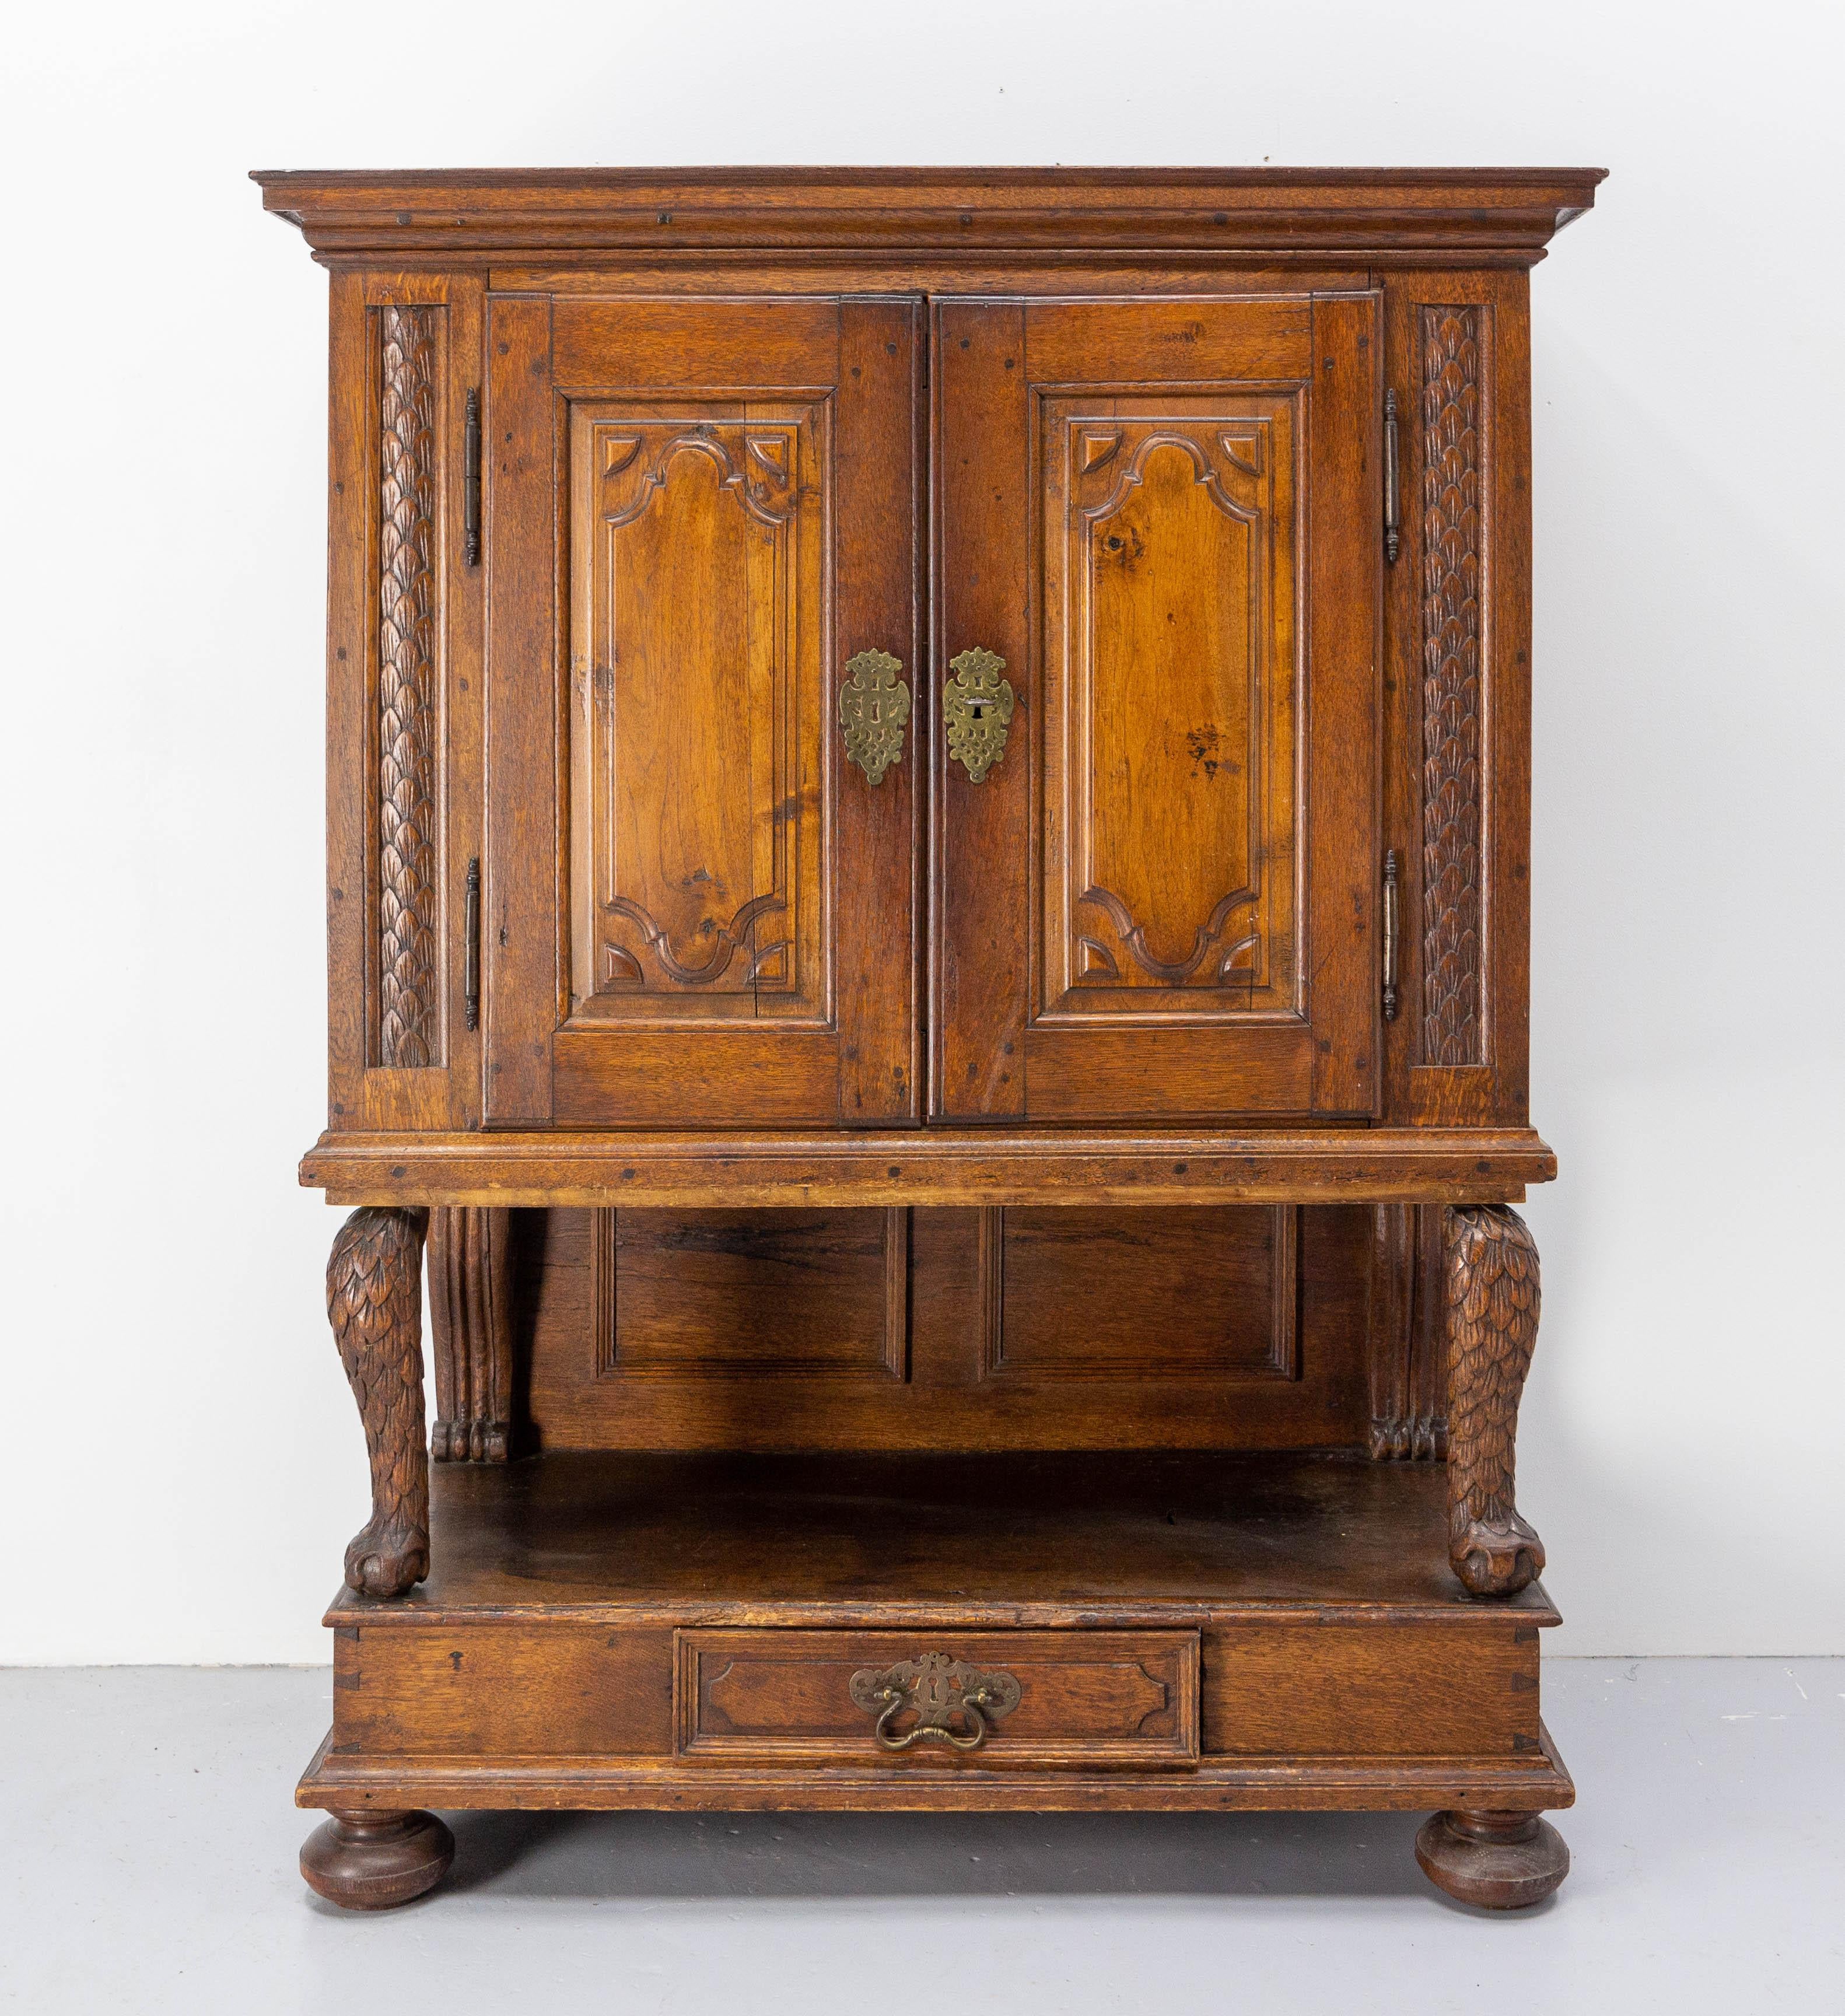 Spanish buffet double sideboard with two doors and one drawer, made in the 18th century
Solid oak with minors parts of fruitwood
Remarkable lion’s legs with scales between the two sides of the buffet.
One of a kind
Furniture in two